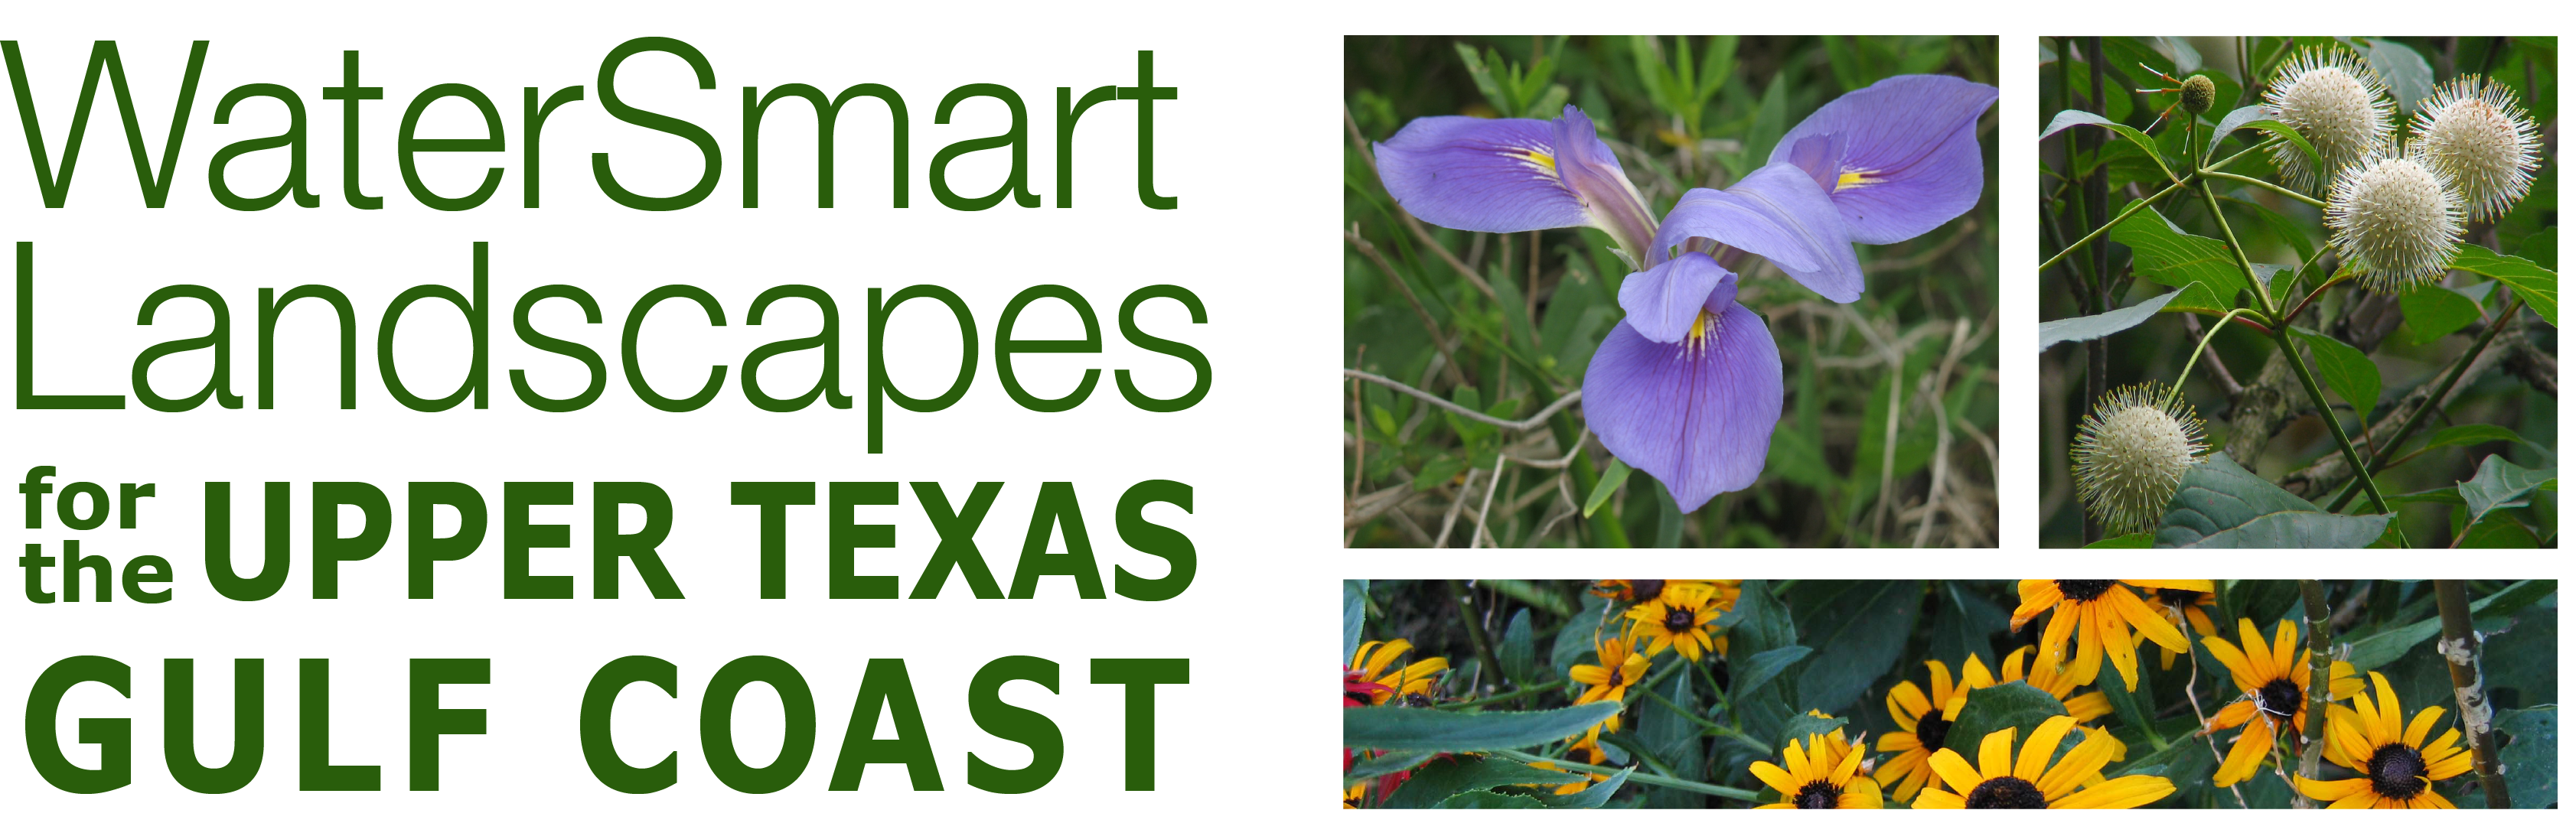 WaterSmart Landscapes for the Upper Texas Gulf Coast